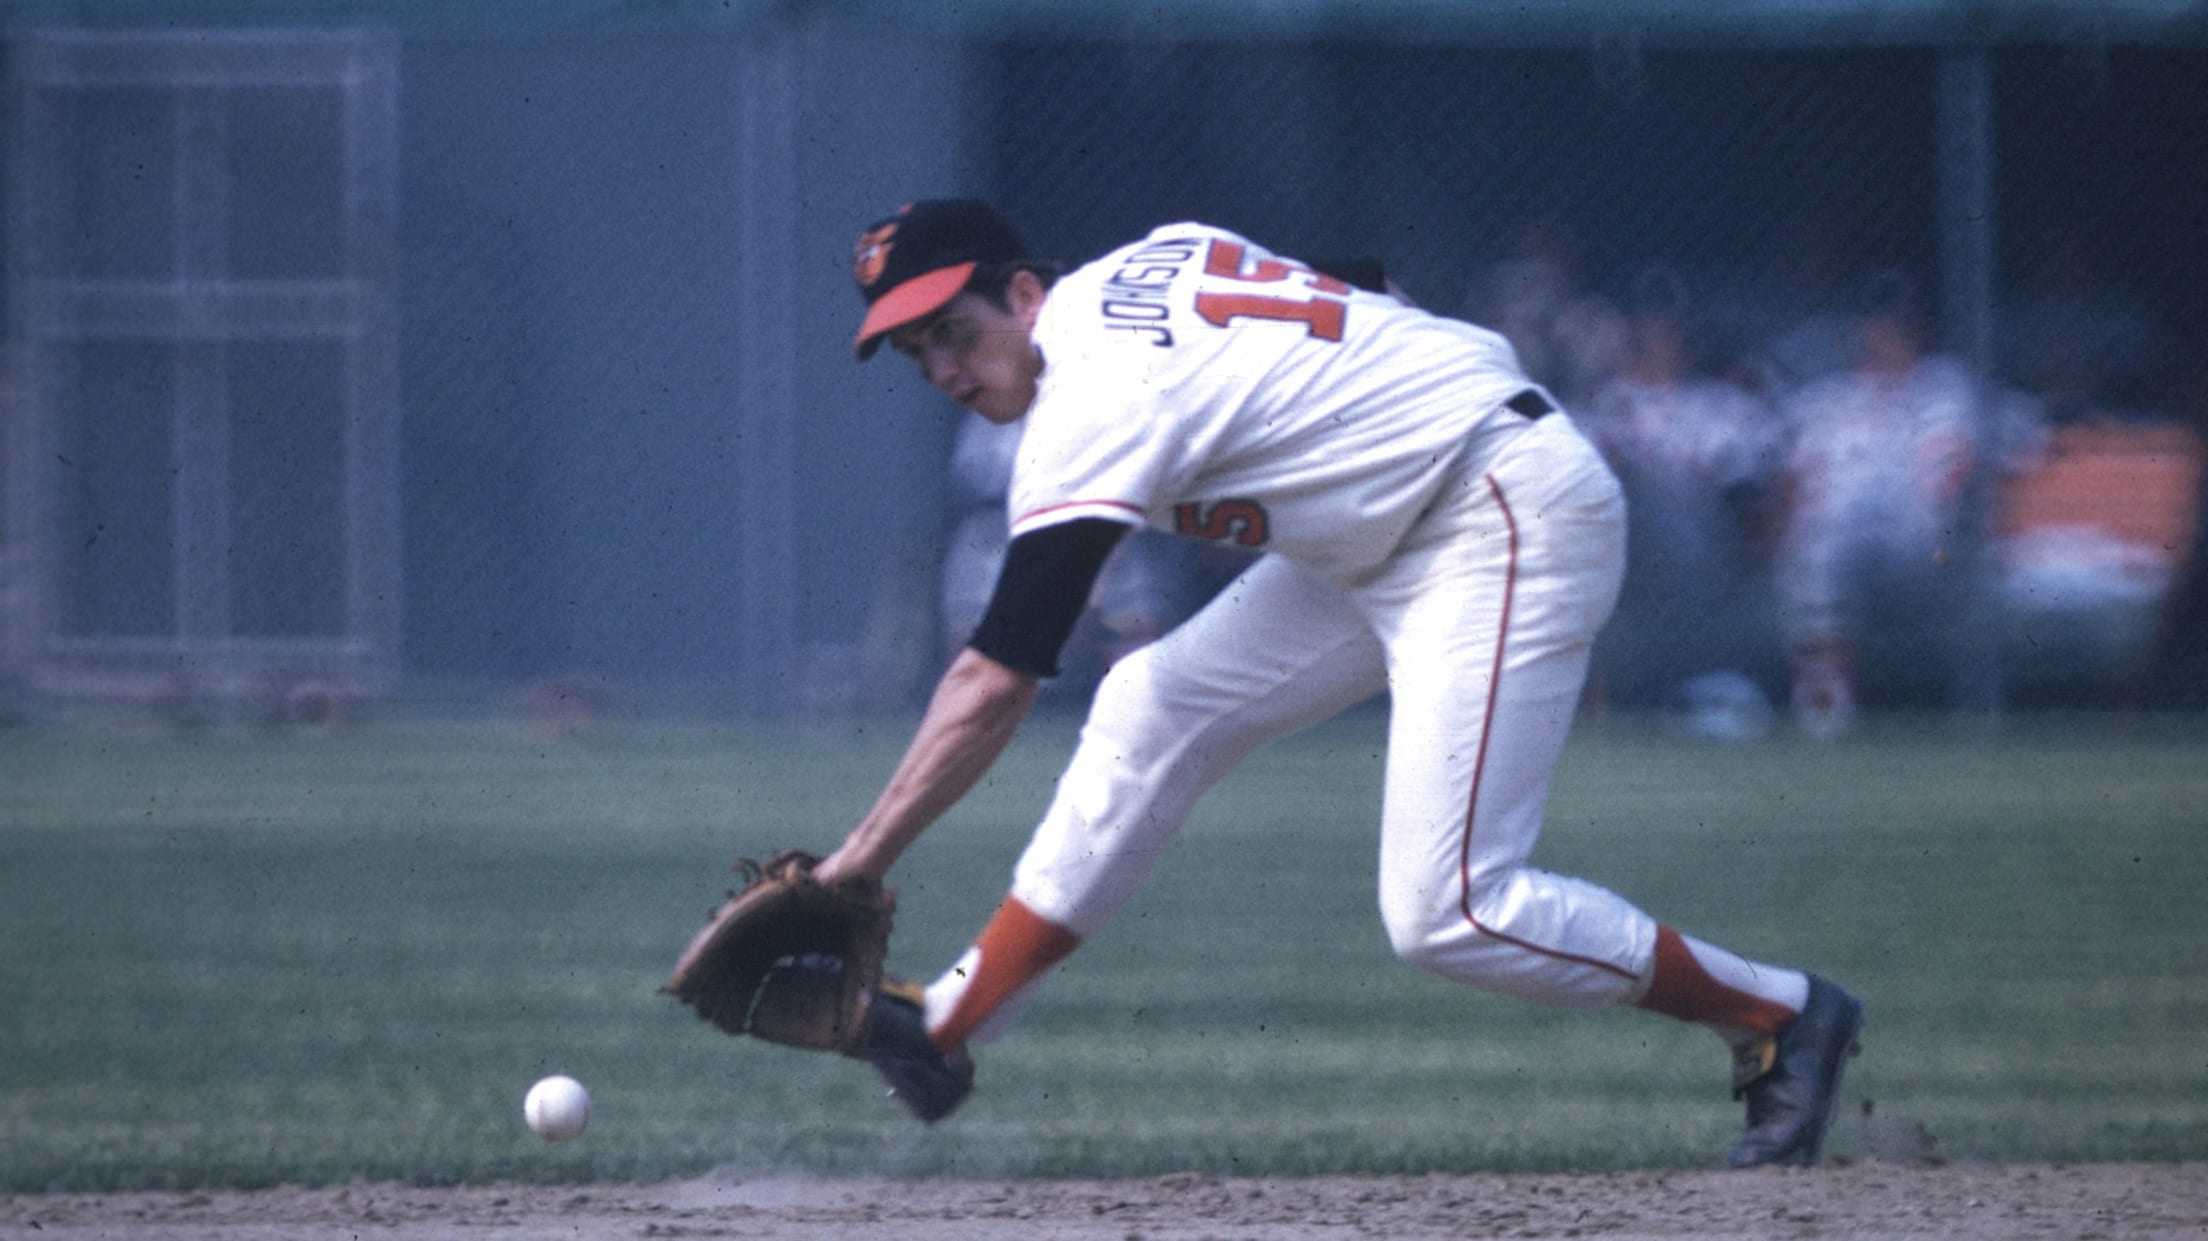 In the zone: Former Orioles player recalls 1970 World Series, Pro Sports